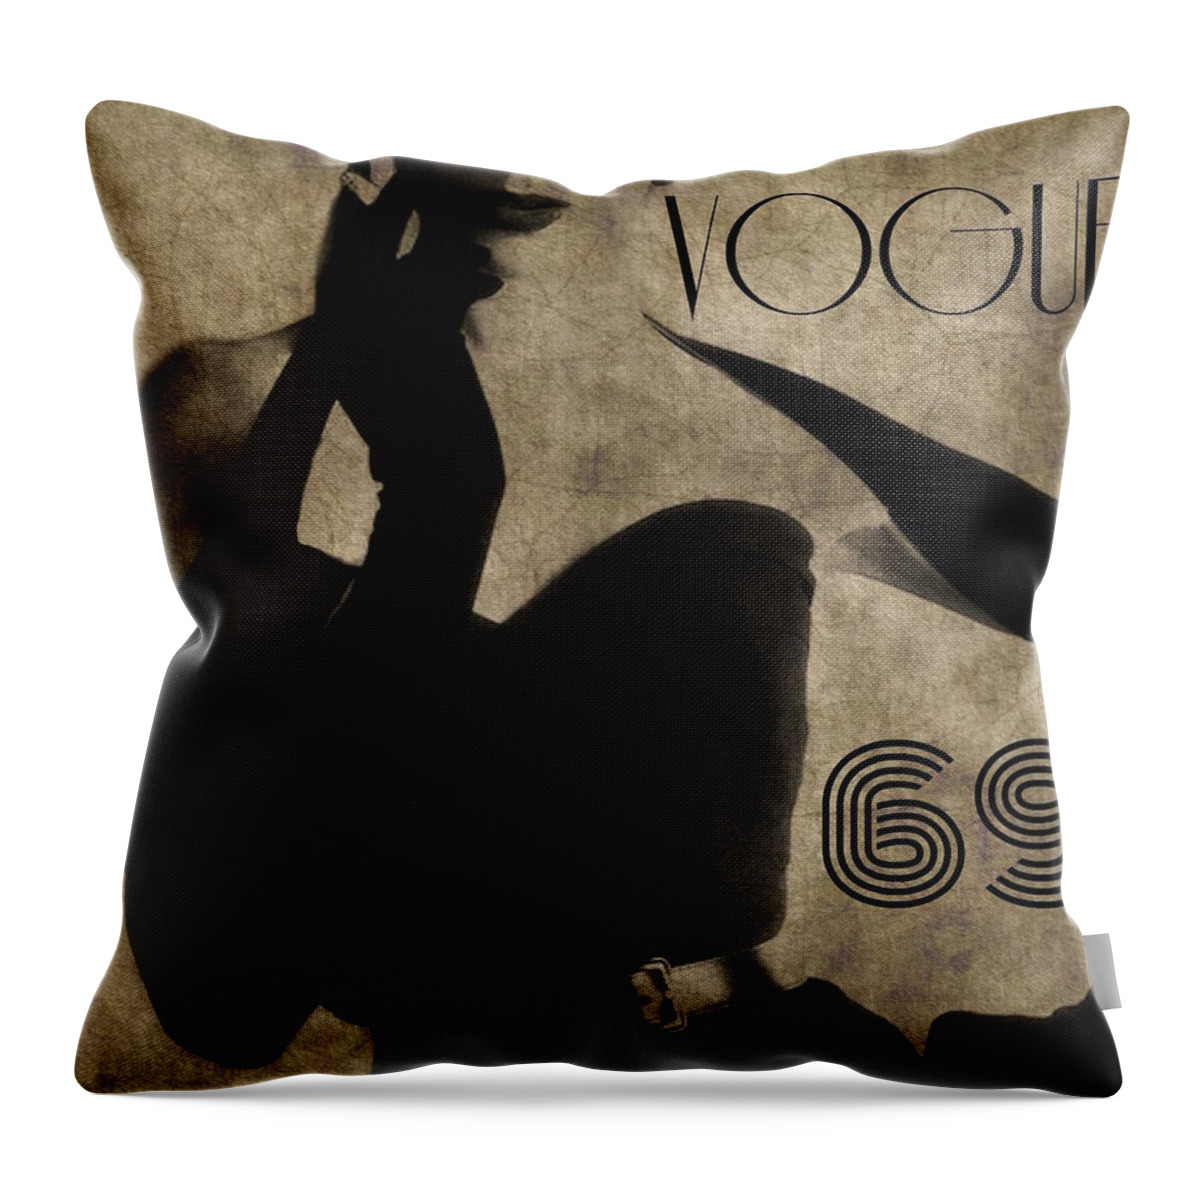 Vintage Throw Pillow featuring the digital art Elegant 69 Vogue by Paul Lovering